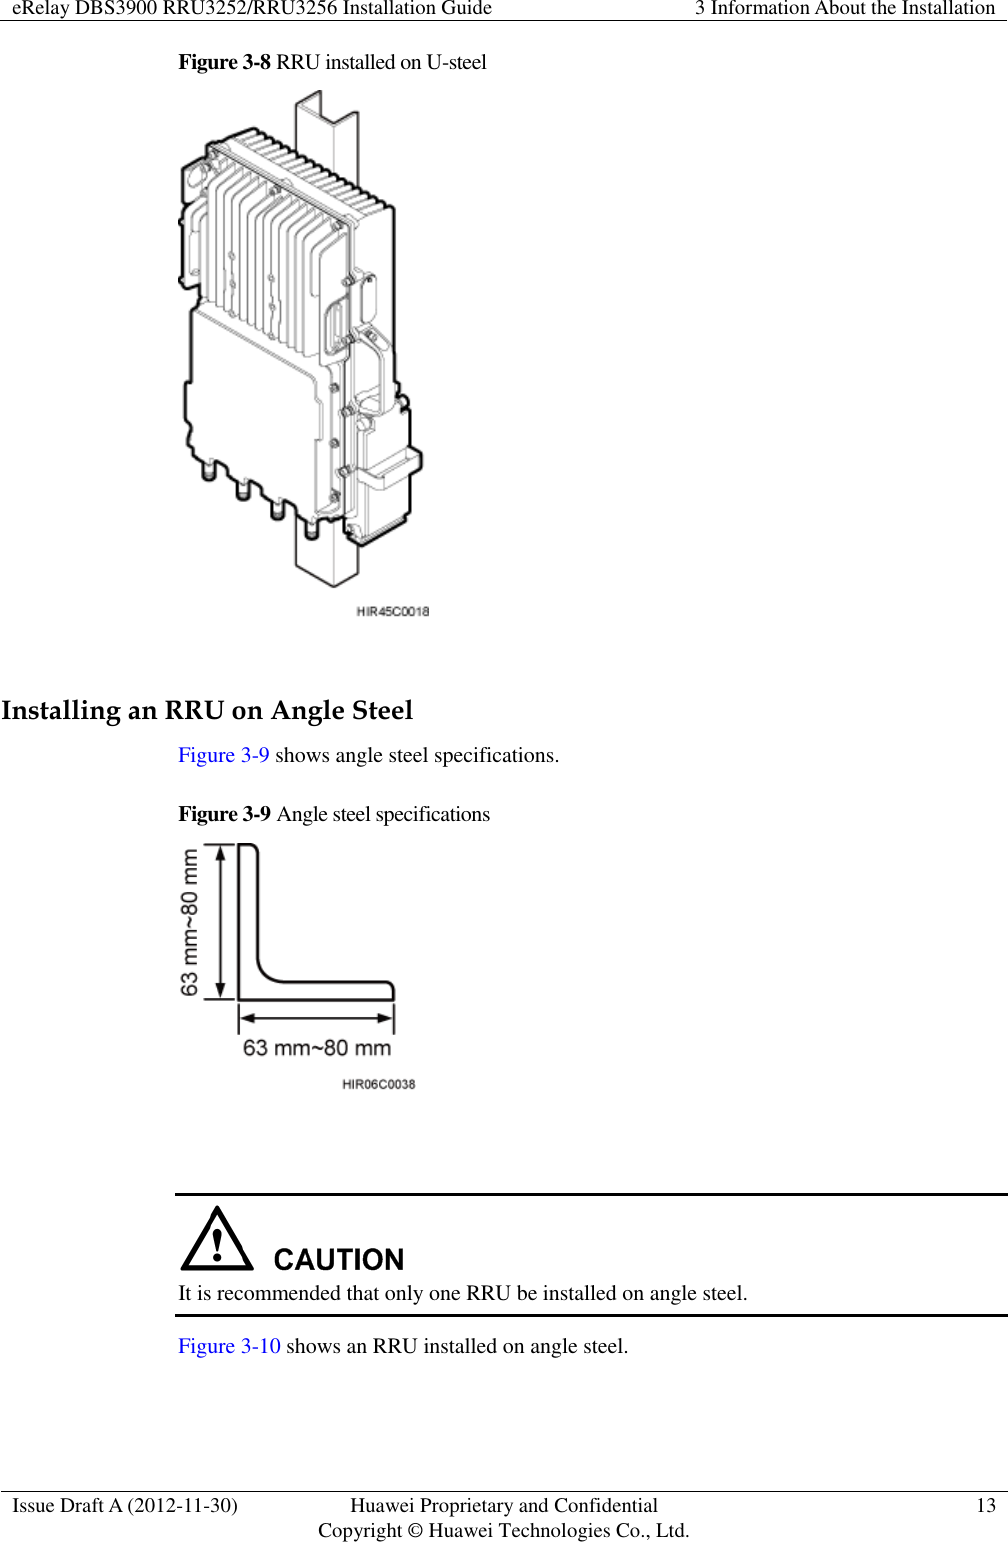 eRelay DBS3900 RRU3252/RRU3256 Installation Guide 3 Information About the Installation  Issue Draft A (2012-11-30) Huawei Proprietary and Confidential                                     Copyright © Huawei Technologies Co., Ltd. 13  Figure 3-8 RRU installed on U-steel   Installing an RRU on Angle Steel Figure 3-9 shows angle steel specifications. Figure 3-9 Angle steel specifications     It is recommended that only one RRU be installed on angle steel. Figure 3-10 shows an RRU installed on angle steel. 